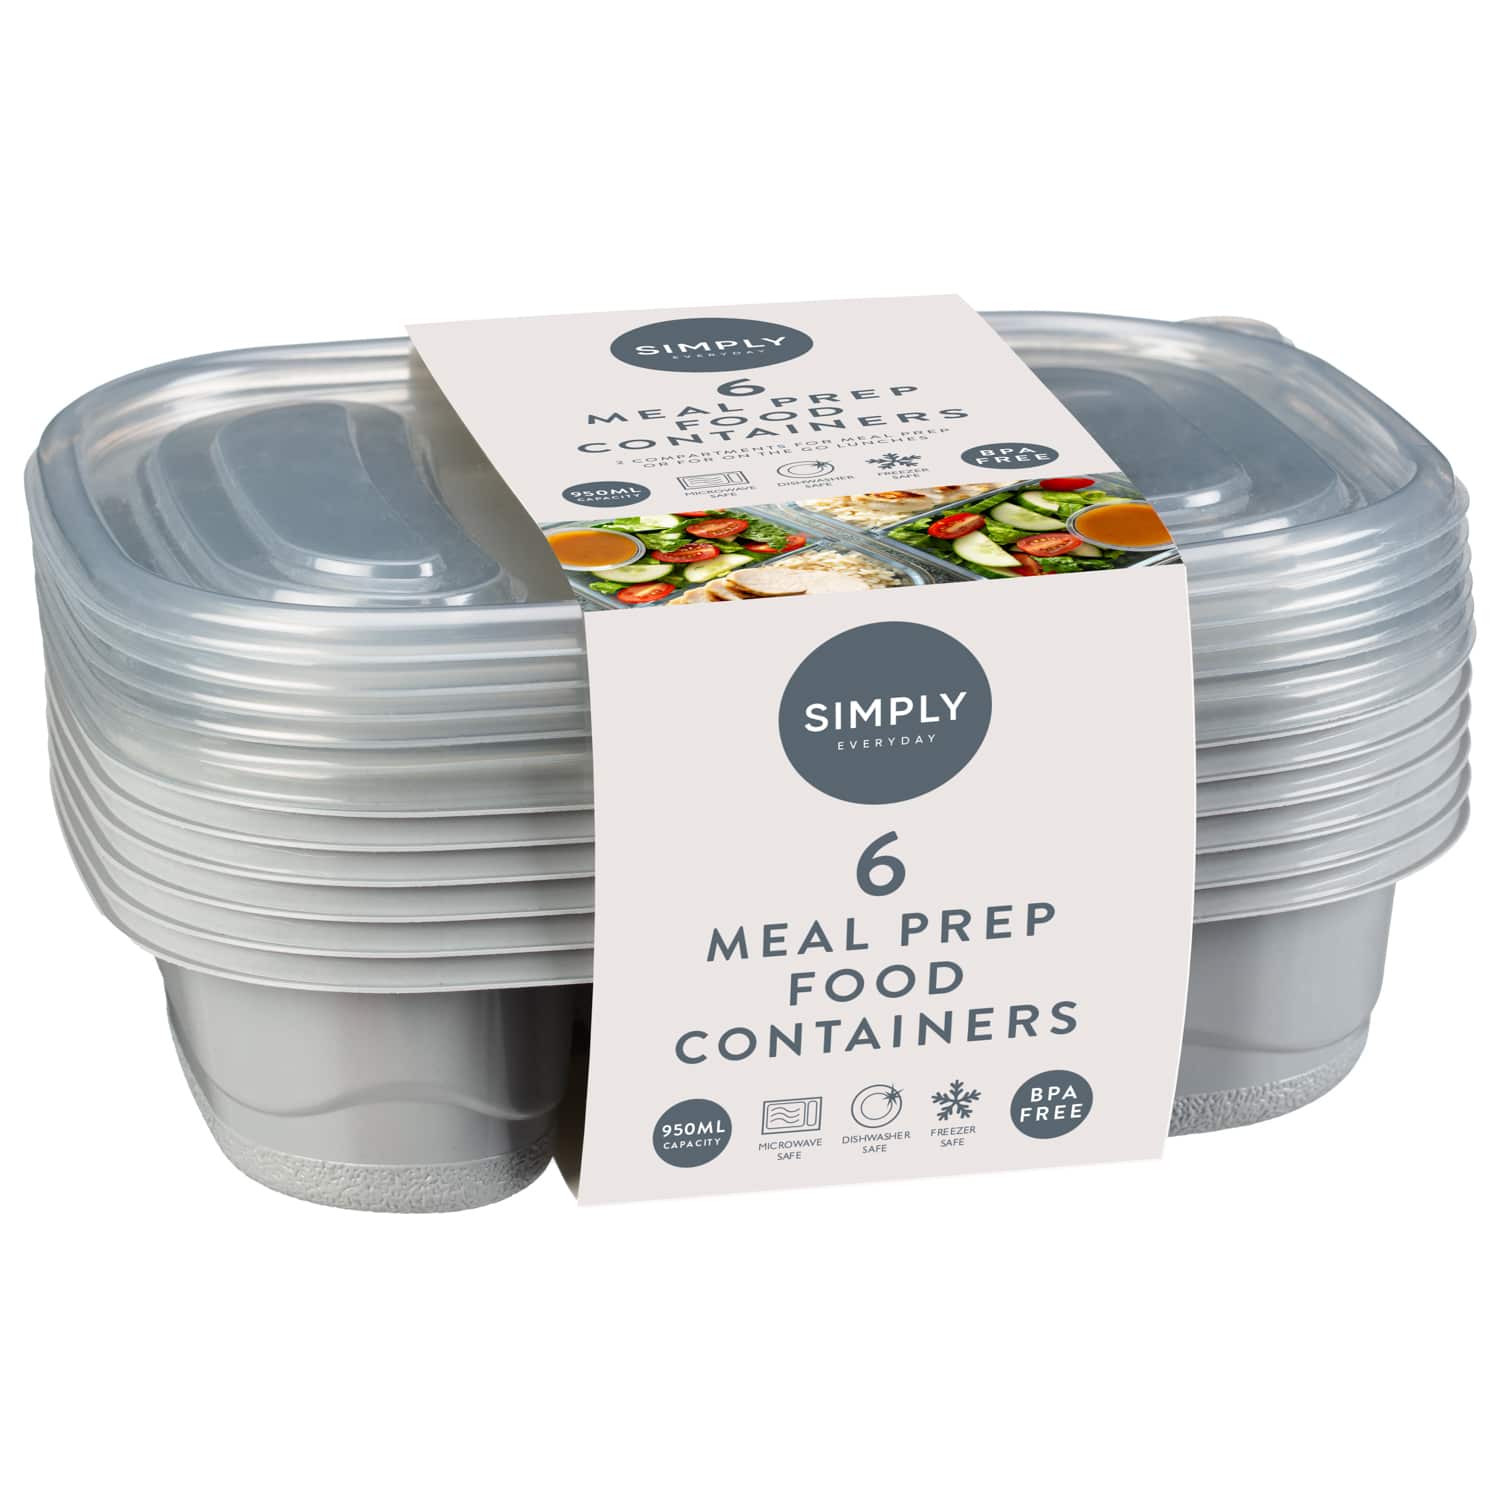 https://www.bmstores.co.uk/images/hpcProductImage/imgSource/400921-6pk-simply-everyday-acrylic-straes-with-cleaner-grey2-compartment-food-containers.jpg